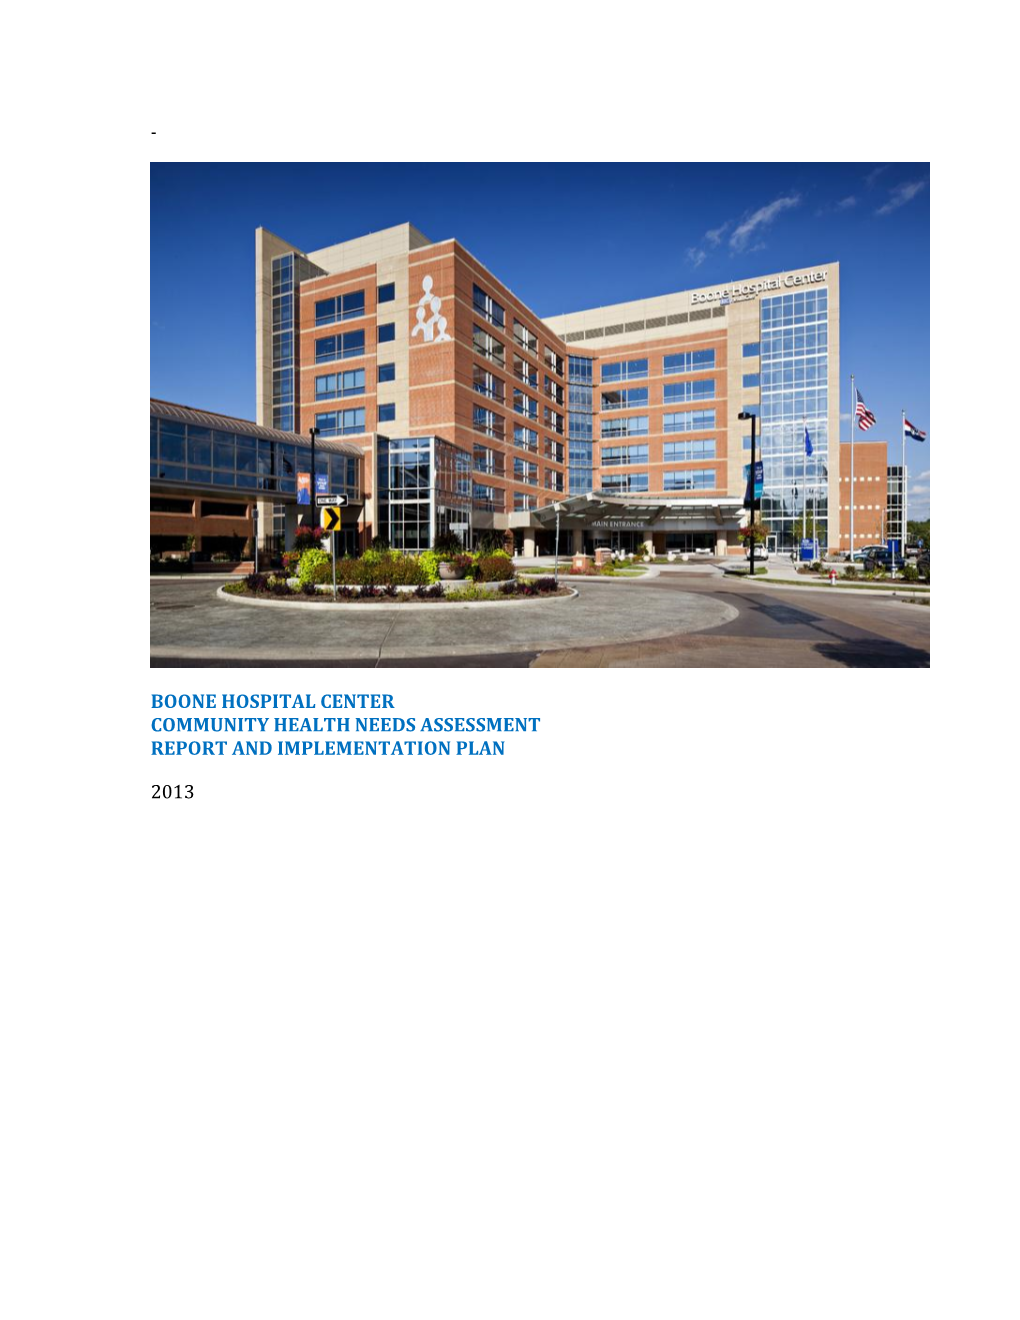 Boone Hospital Center Community Health Needs Assessment Report and Implementation Plan